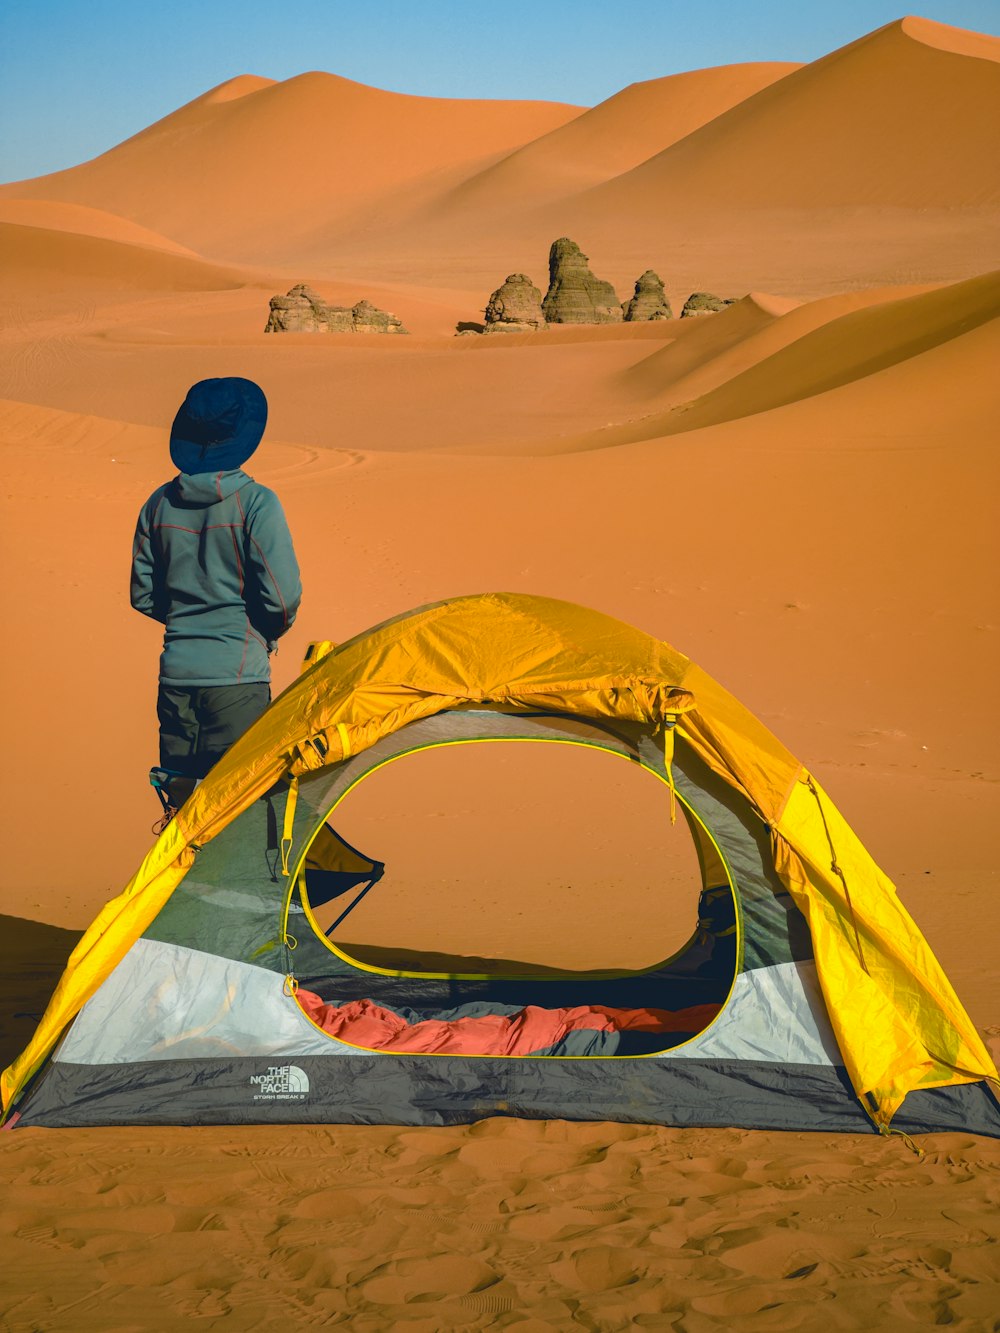 a person standing next to a tent in the desert